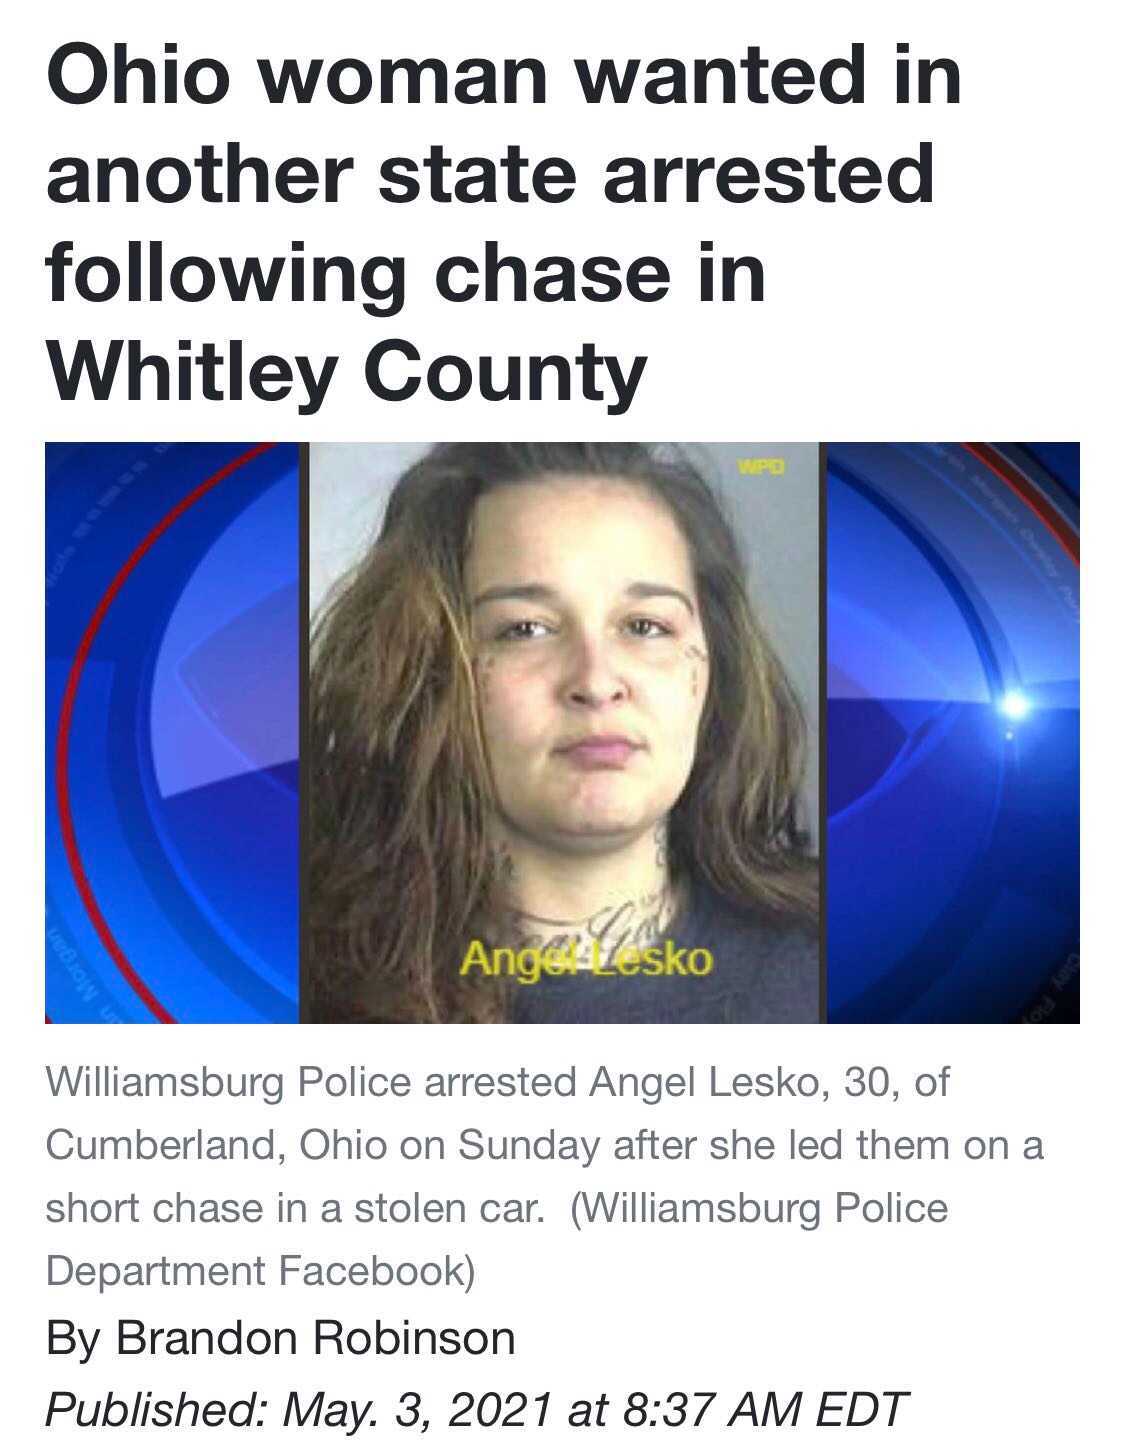 head - Ohio woman wanted in another state arrested ing chase in Whitley County Pe Angalisko Morgan Williamsburg Police arrested Angel Lesko, 30, of Cumberland, Ohio on Sunday after she led them on a short chase in a stolen car. Williamsburg Police Departm